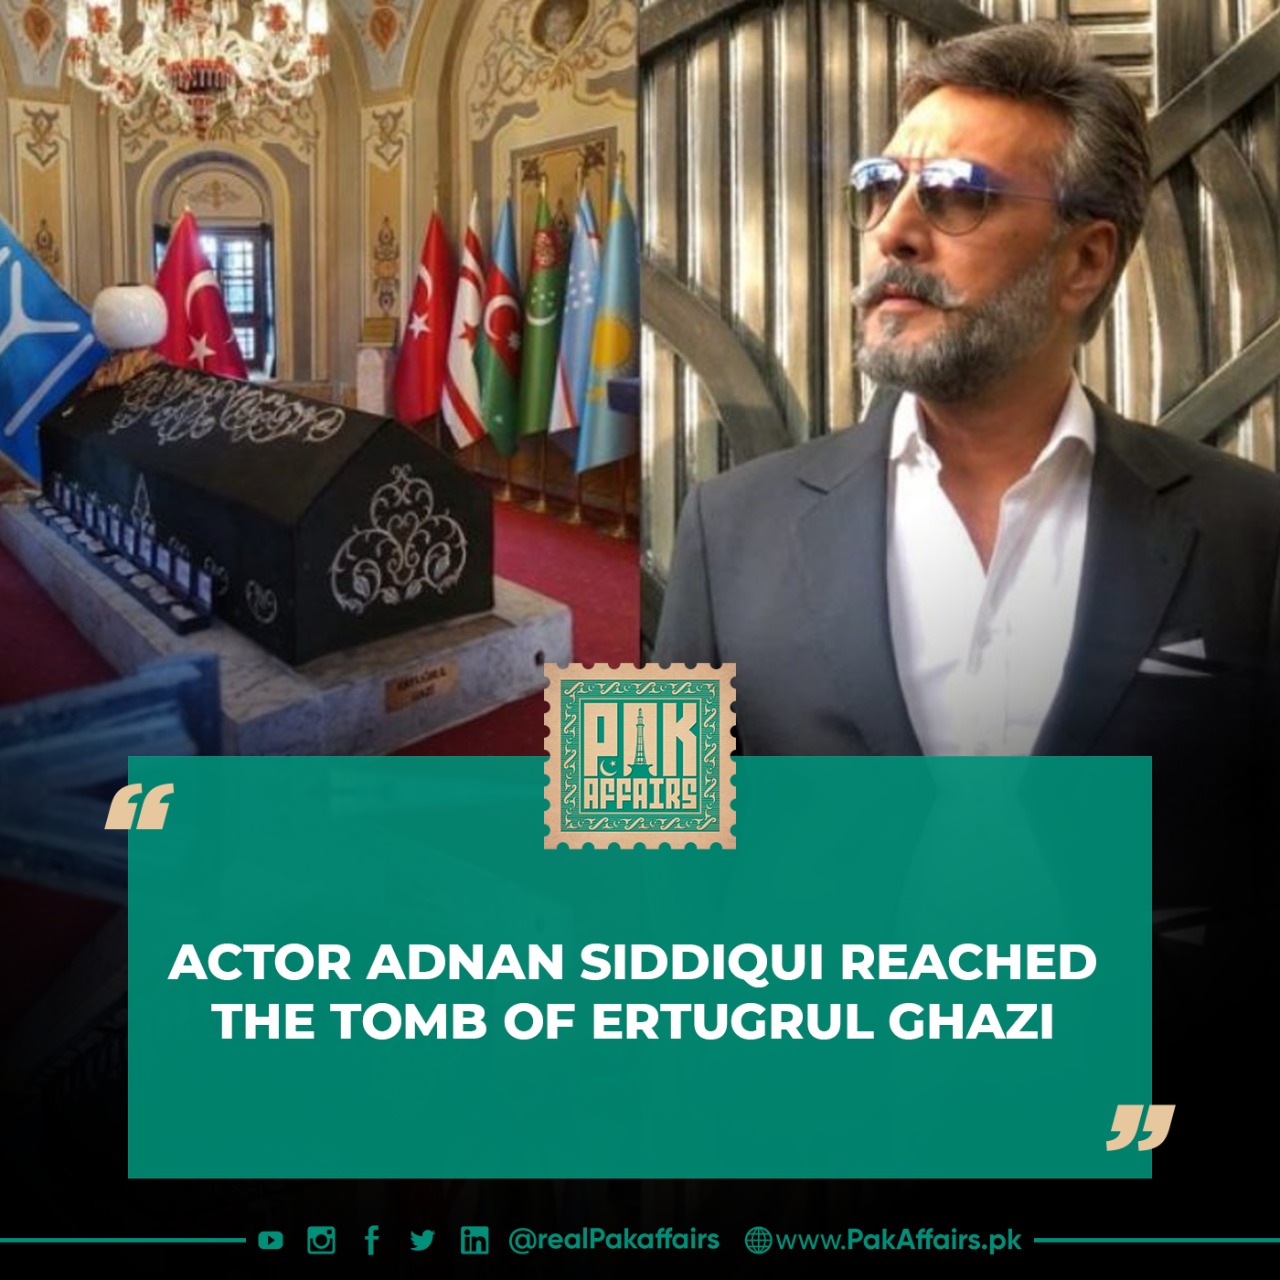 Actor Adnan Siddiqui reached the tomb of Ertugrul Ghaz